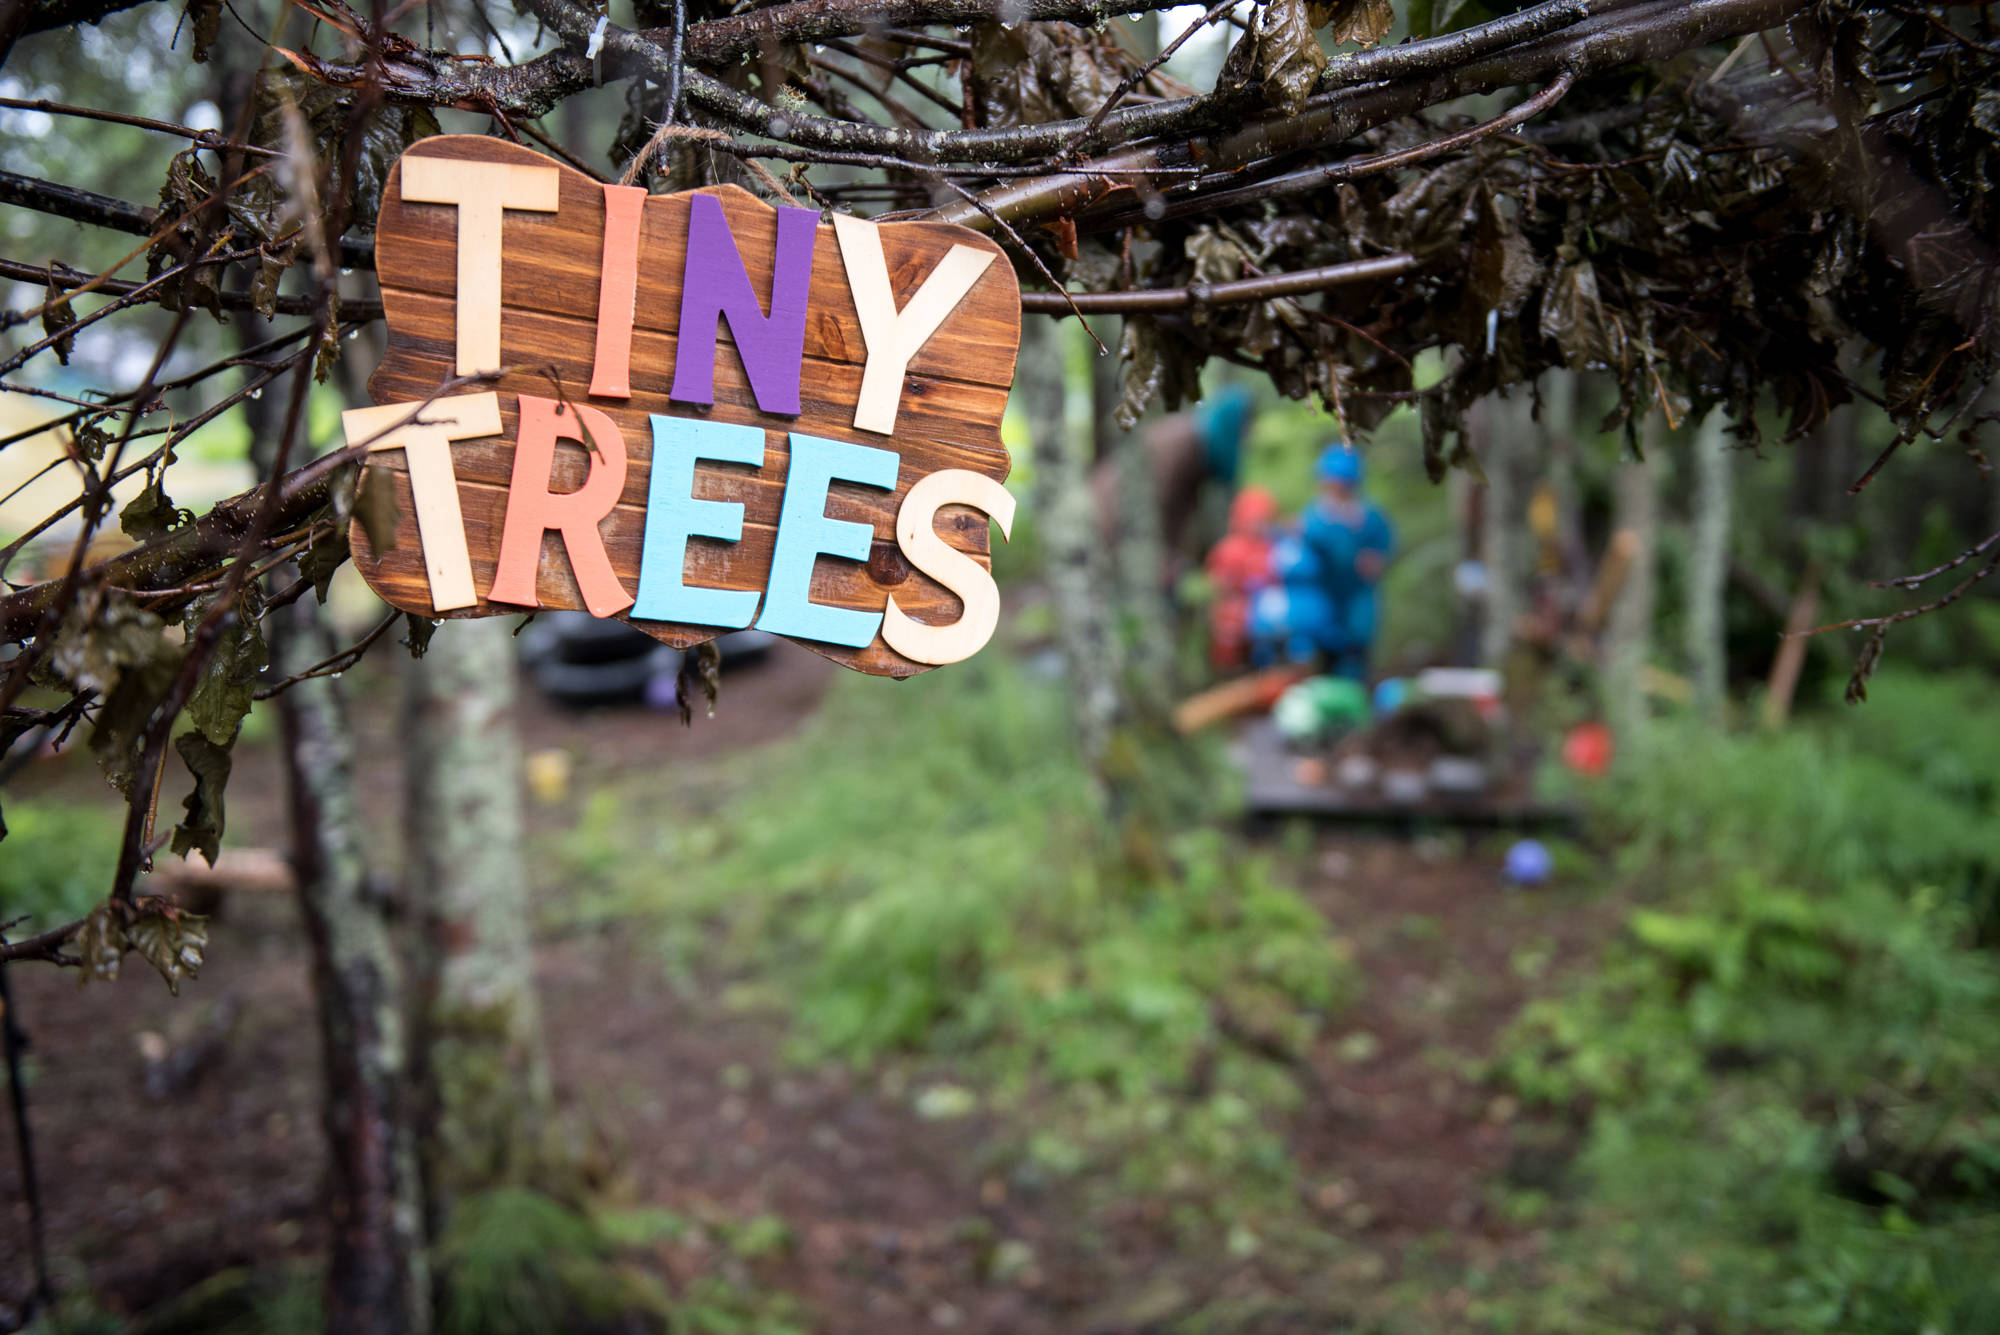 Children enrolled at Tiny Trees spend the majority of their day outdoors, engaged in intentionally set-up, play-based learning activities. If the weather is wet or cold, the children dress appropriately instead of staying indoors. (Photo by Scott Dickerson)